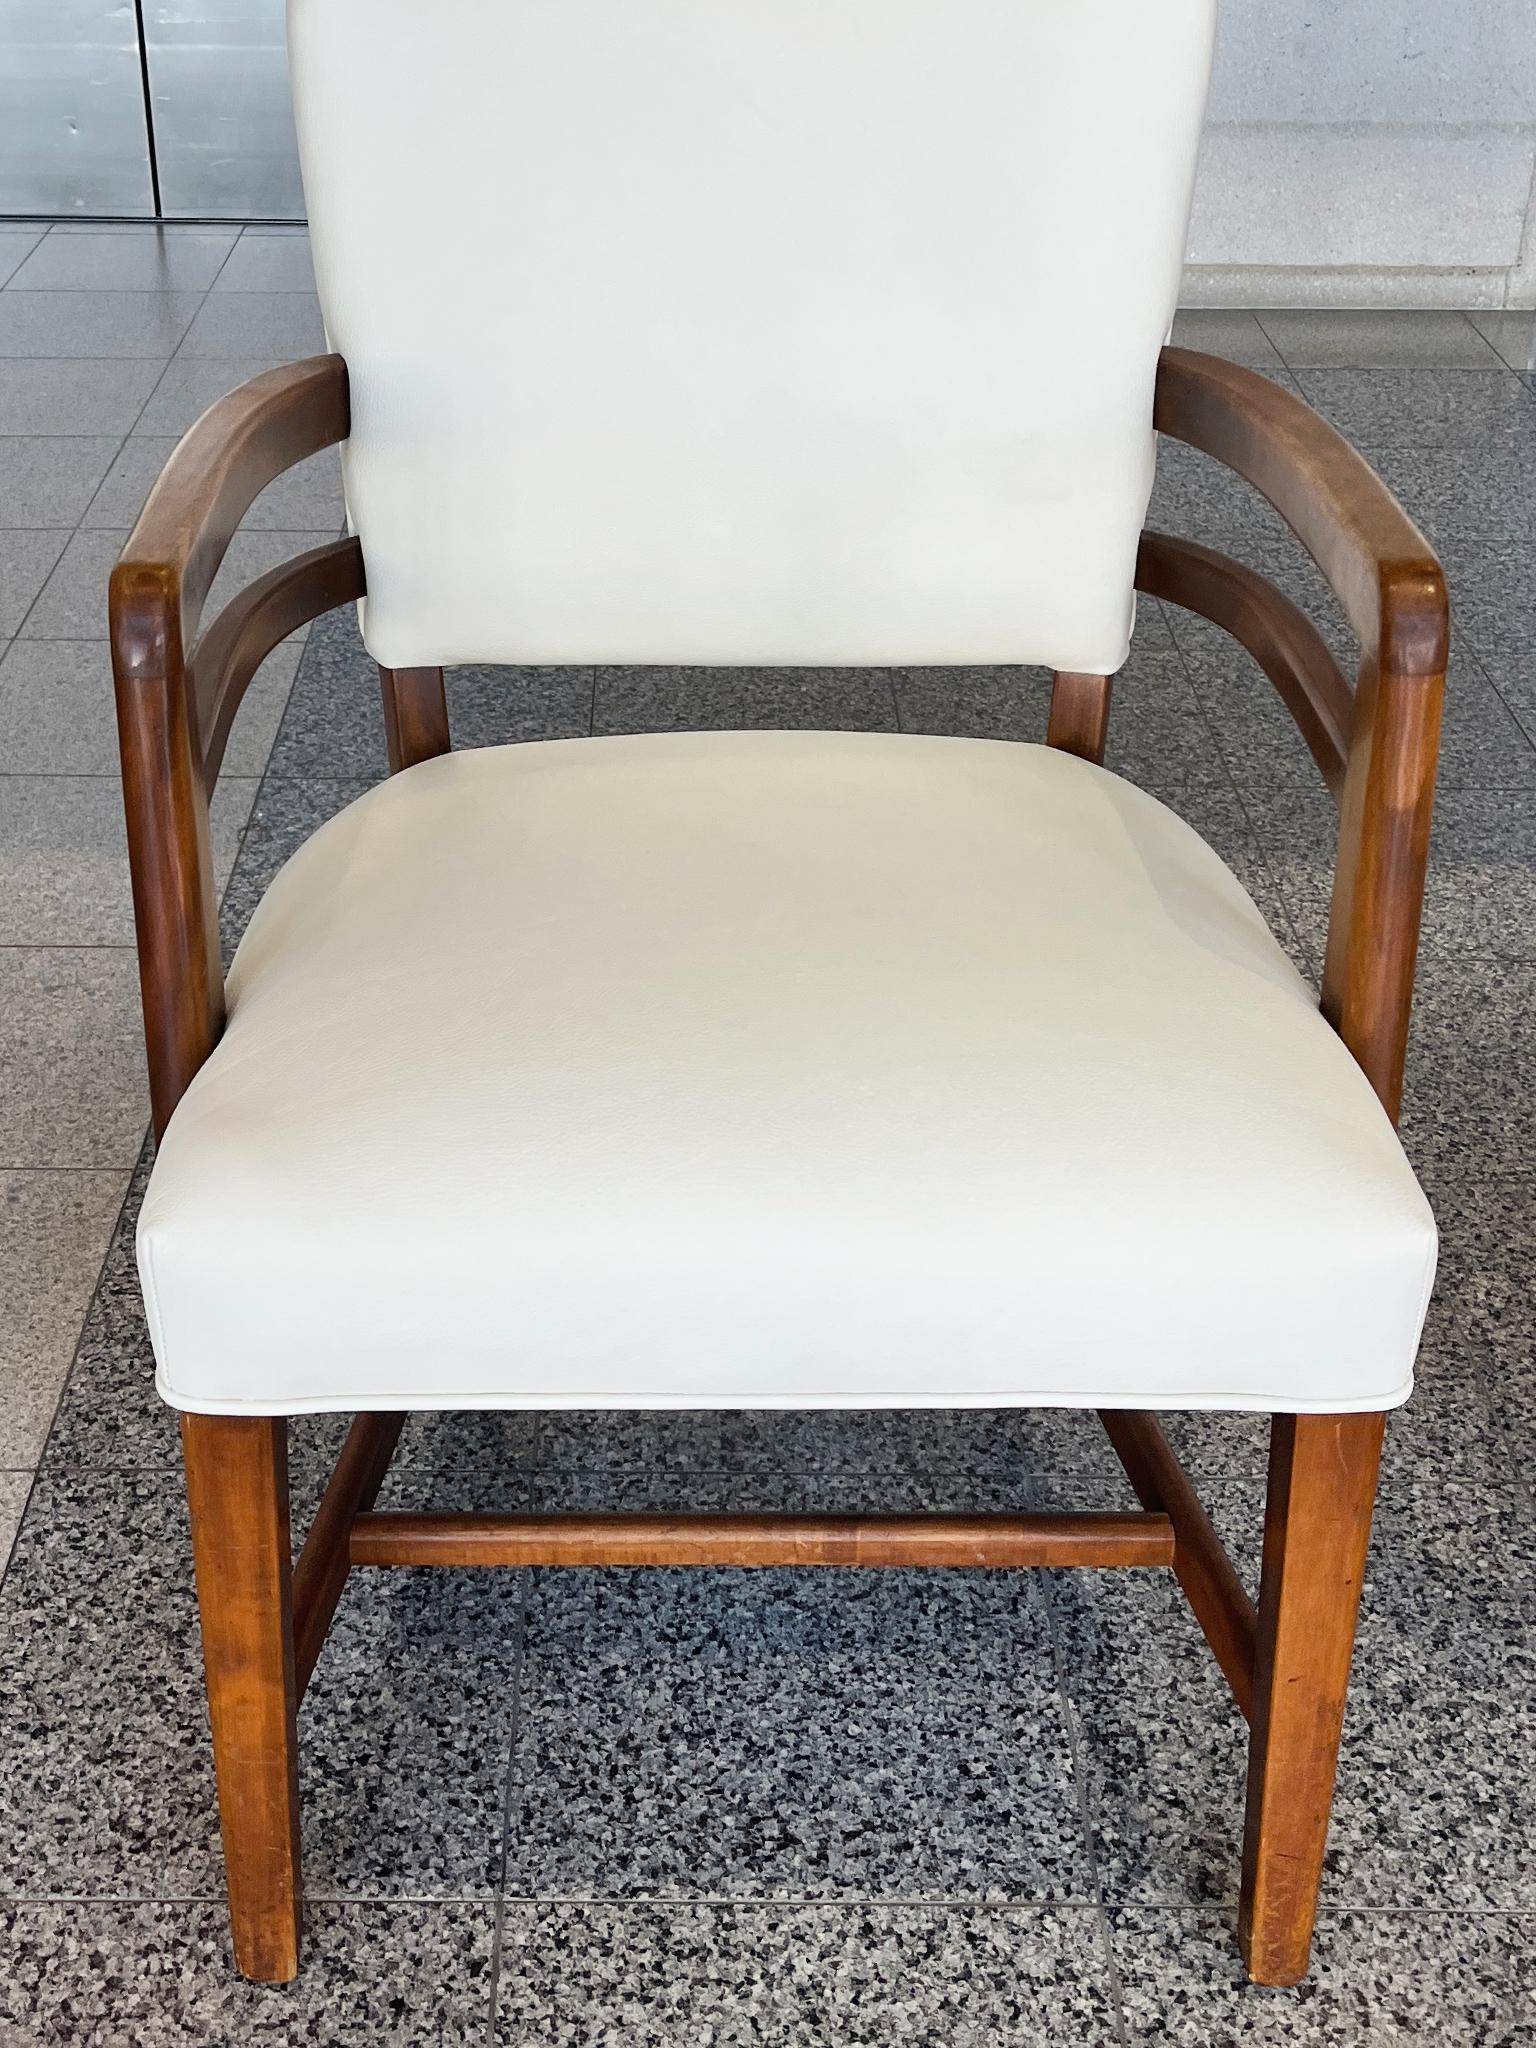 1930s English Art Deco Beech Armchairs in Oyster White Leather, a Pair For Sale 3